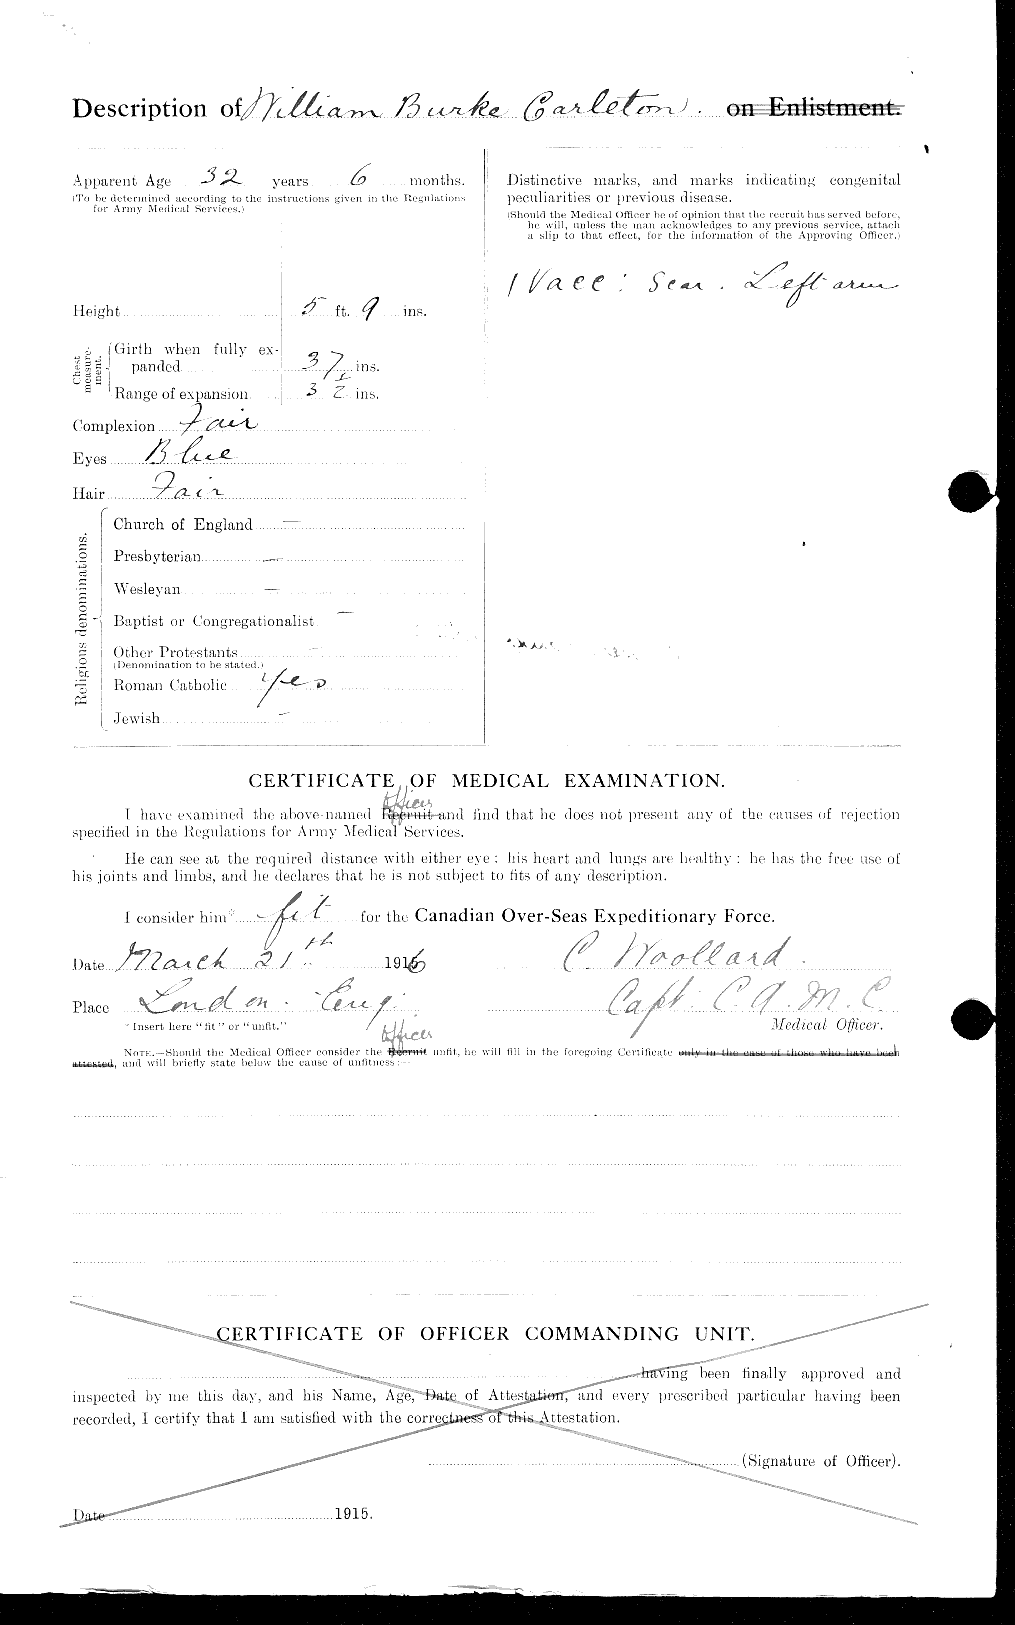 Personnel Records of the First World War - CEF 009588b